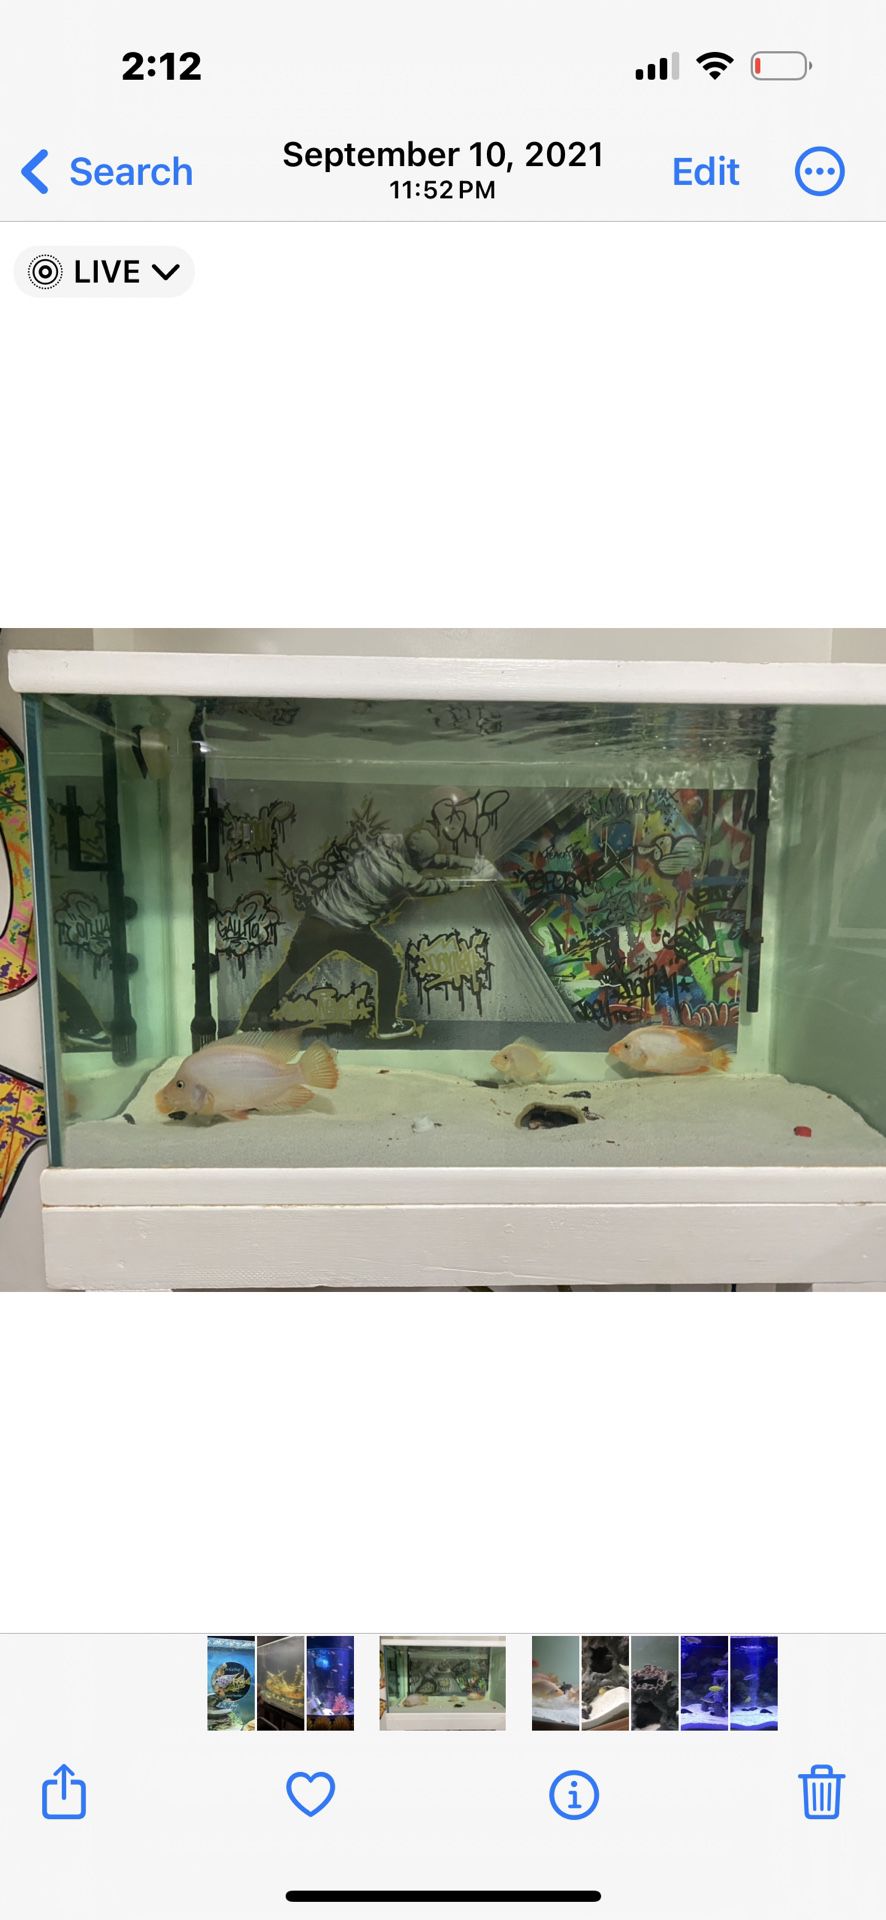 Fish Tank With Stand